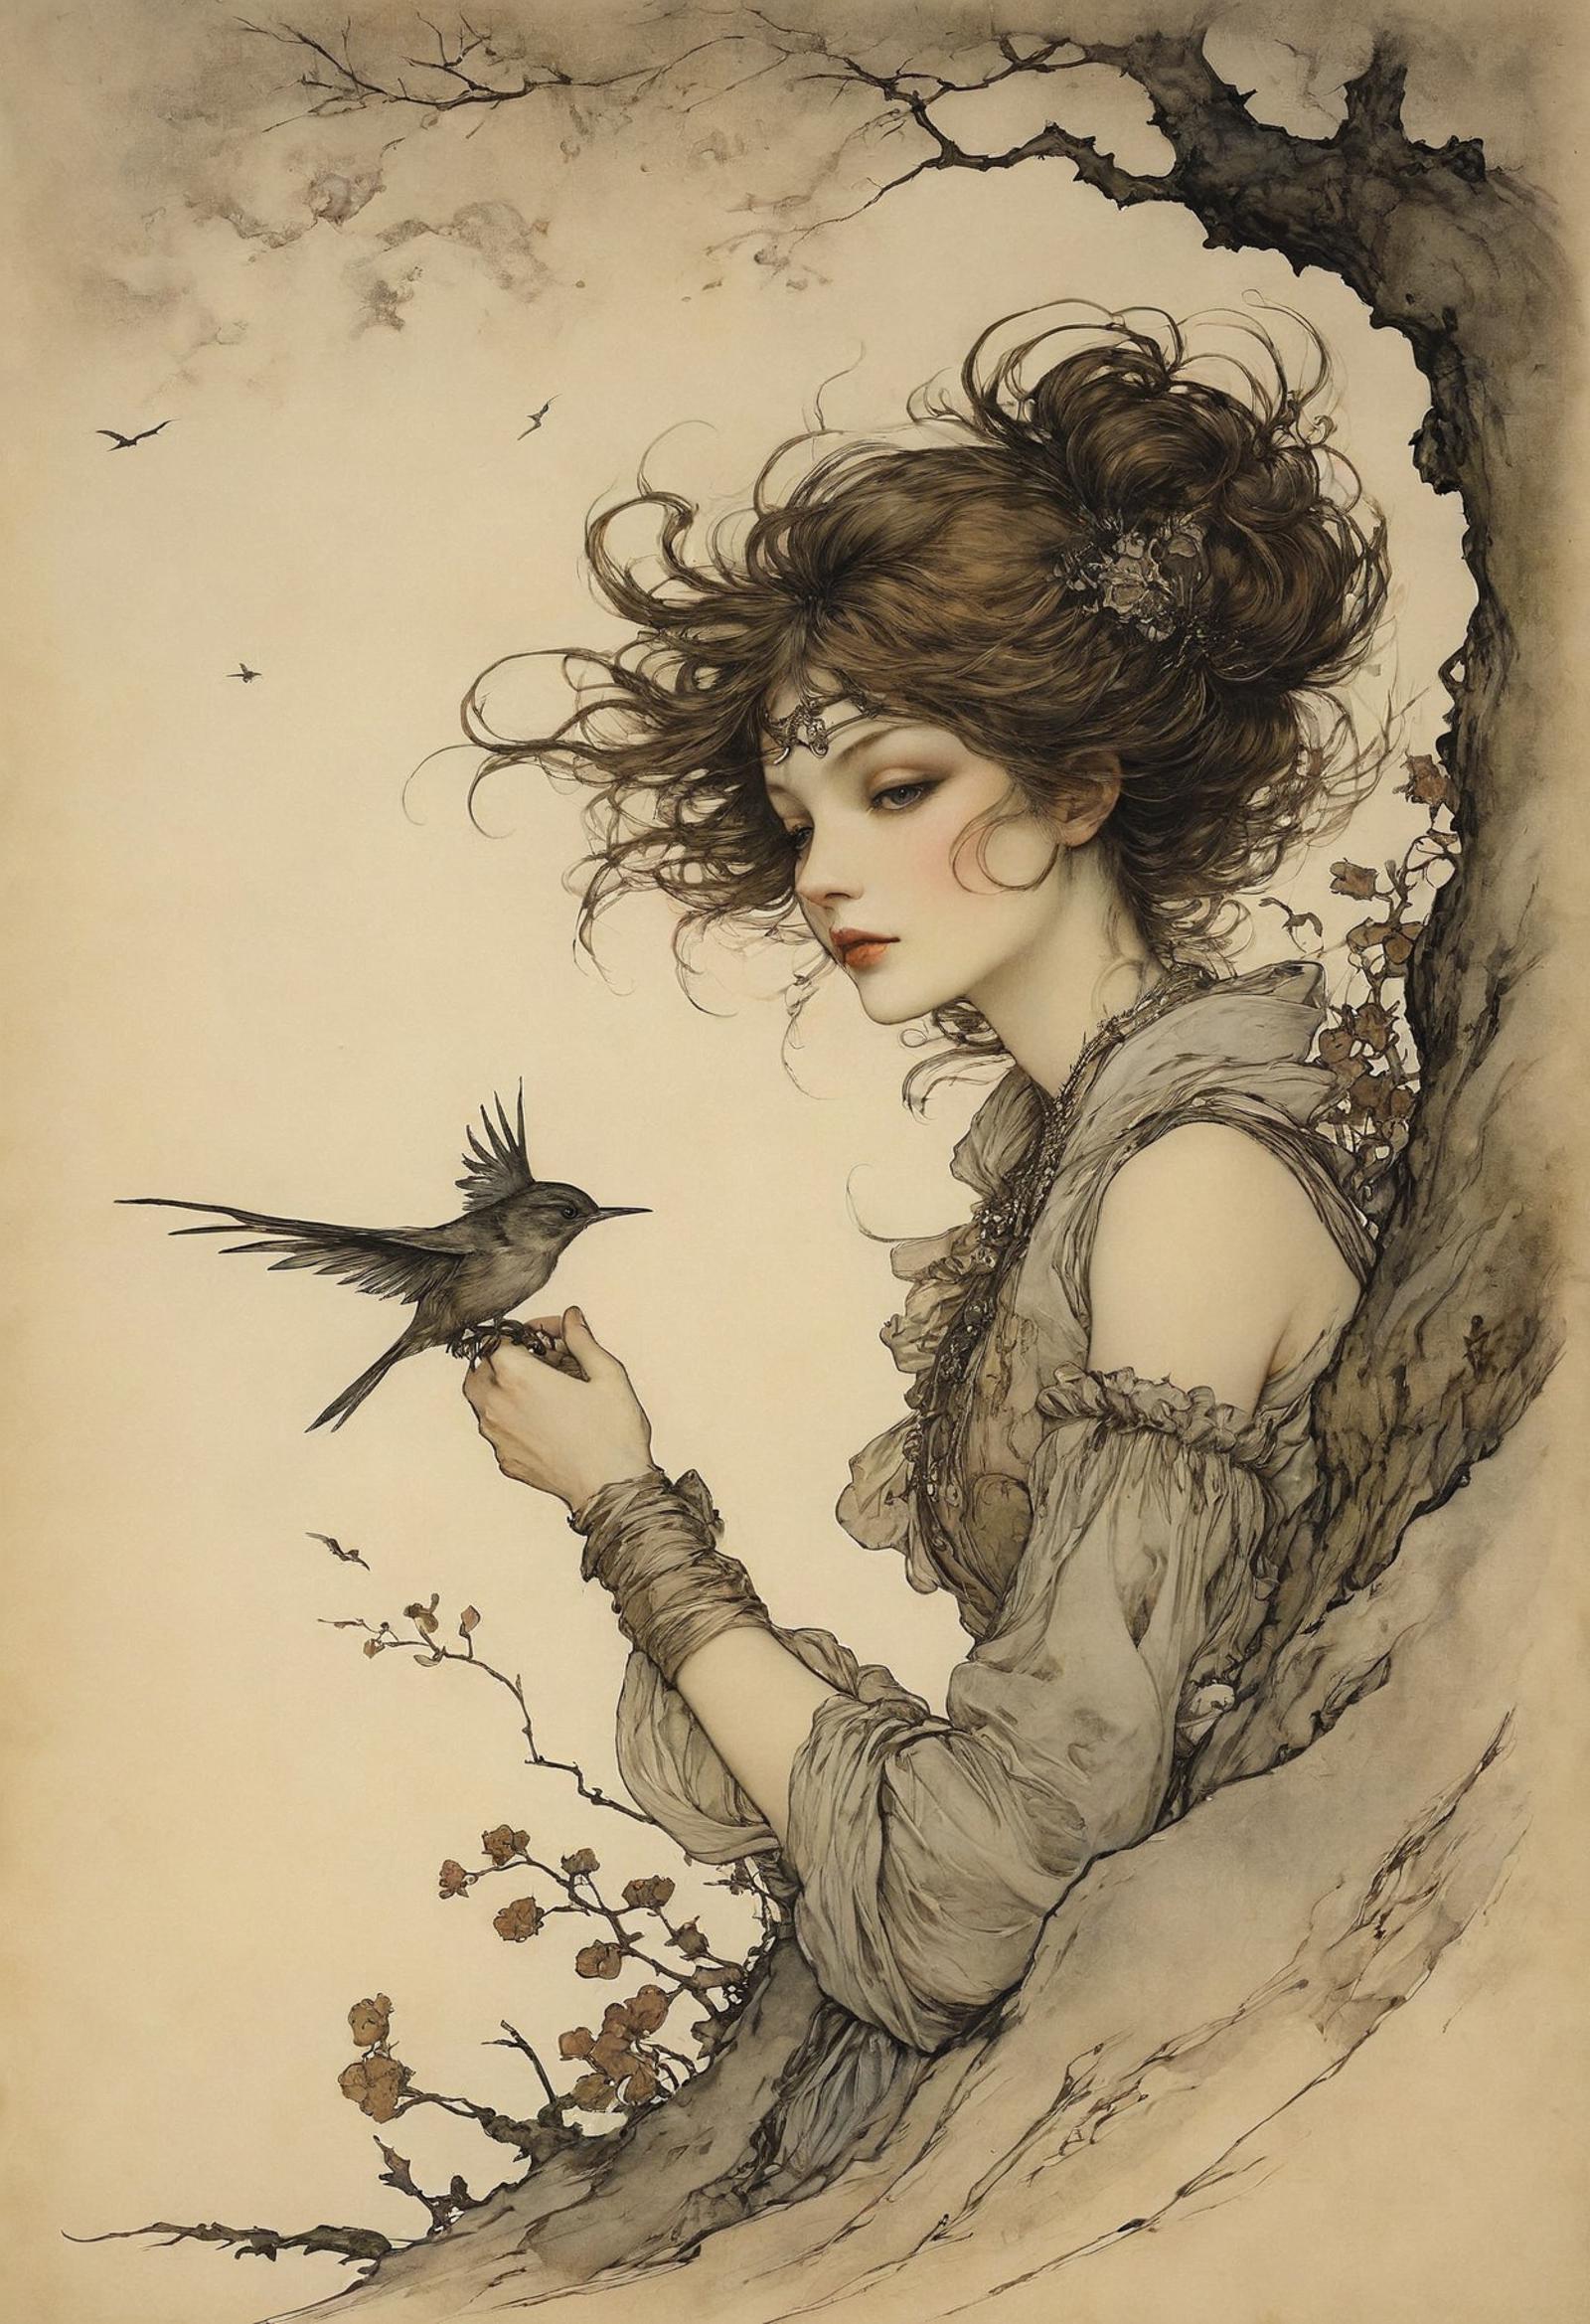 An Artistic Drawing of a Woman with a Bird on Her Hand.